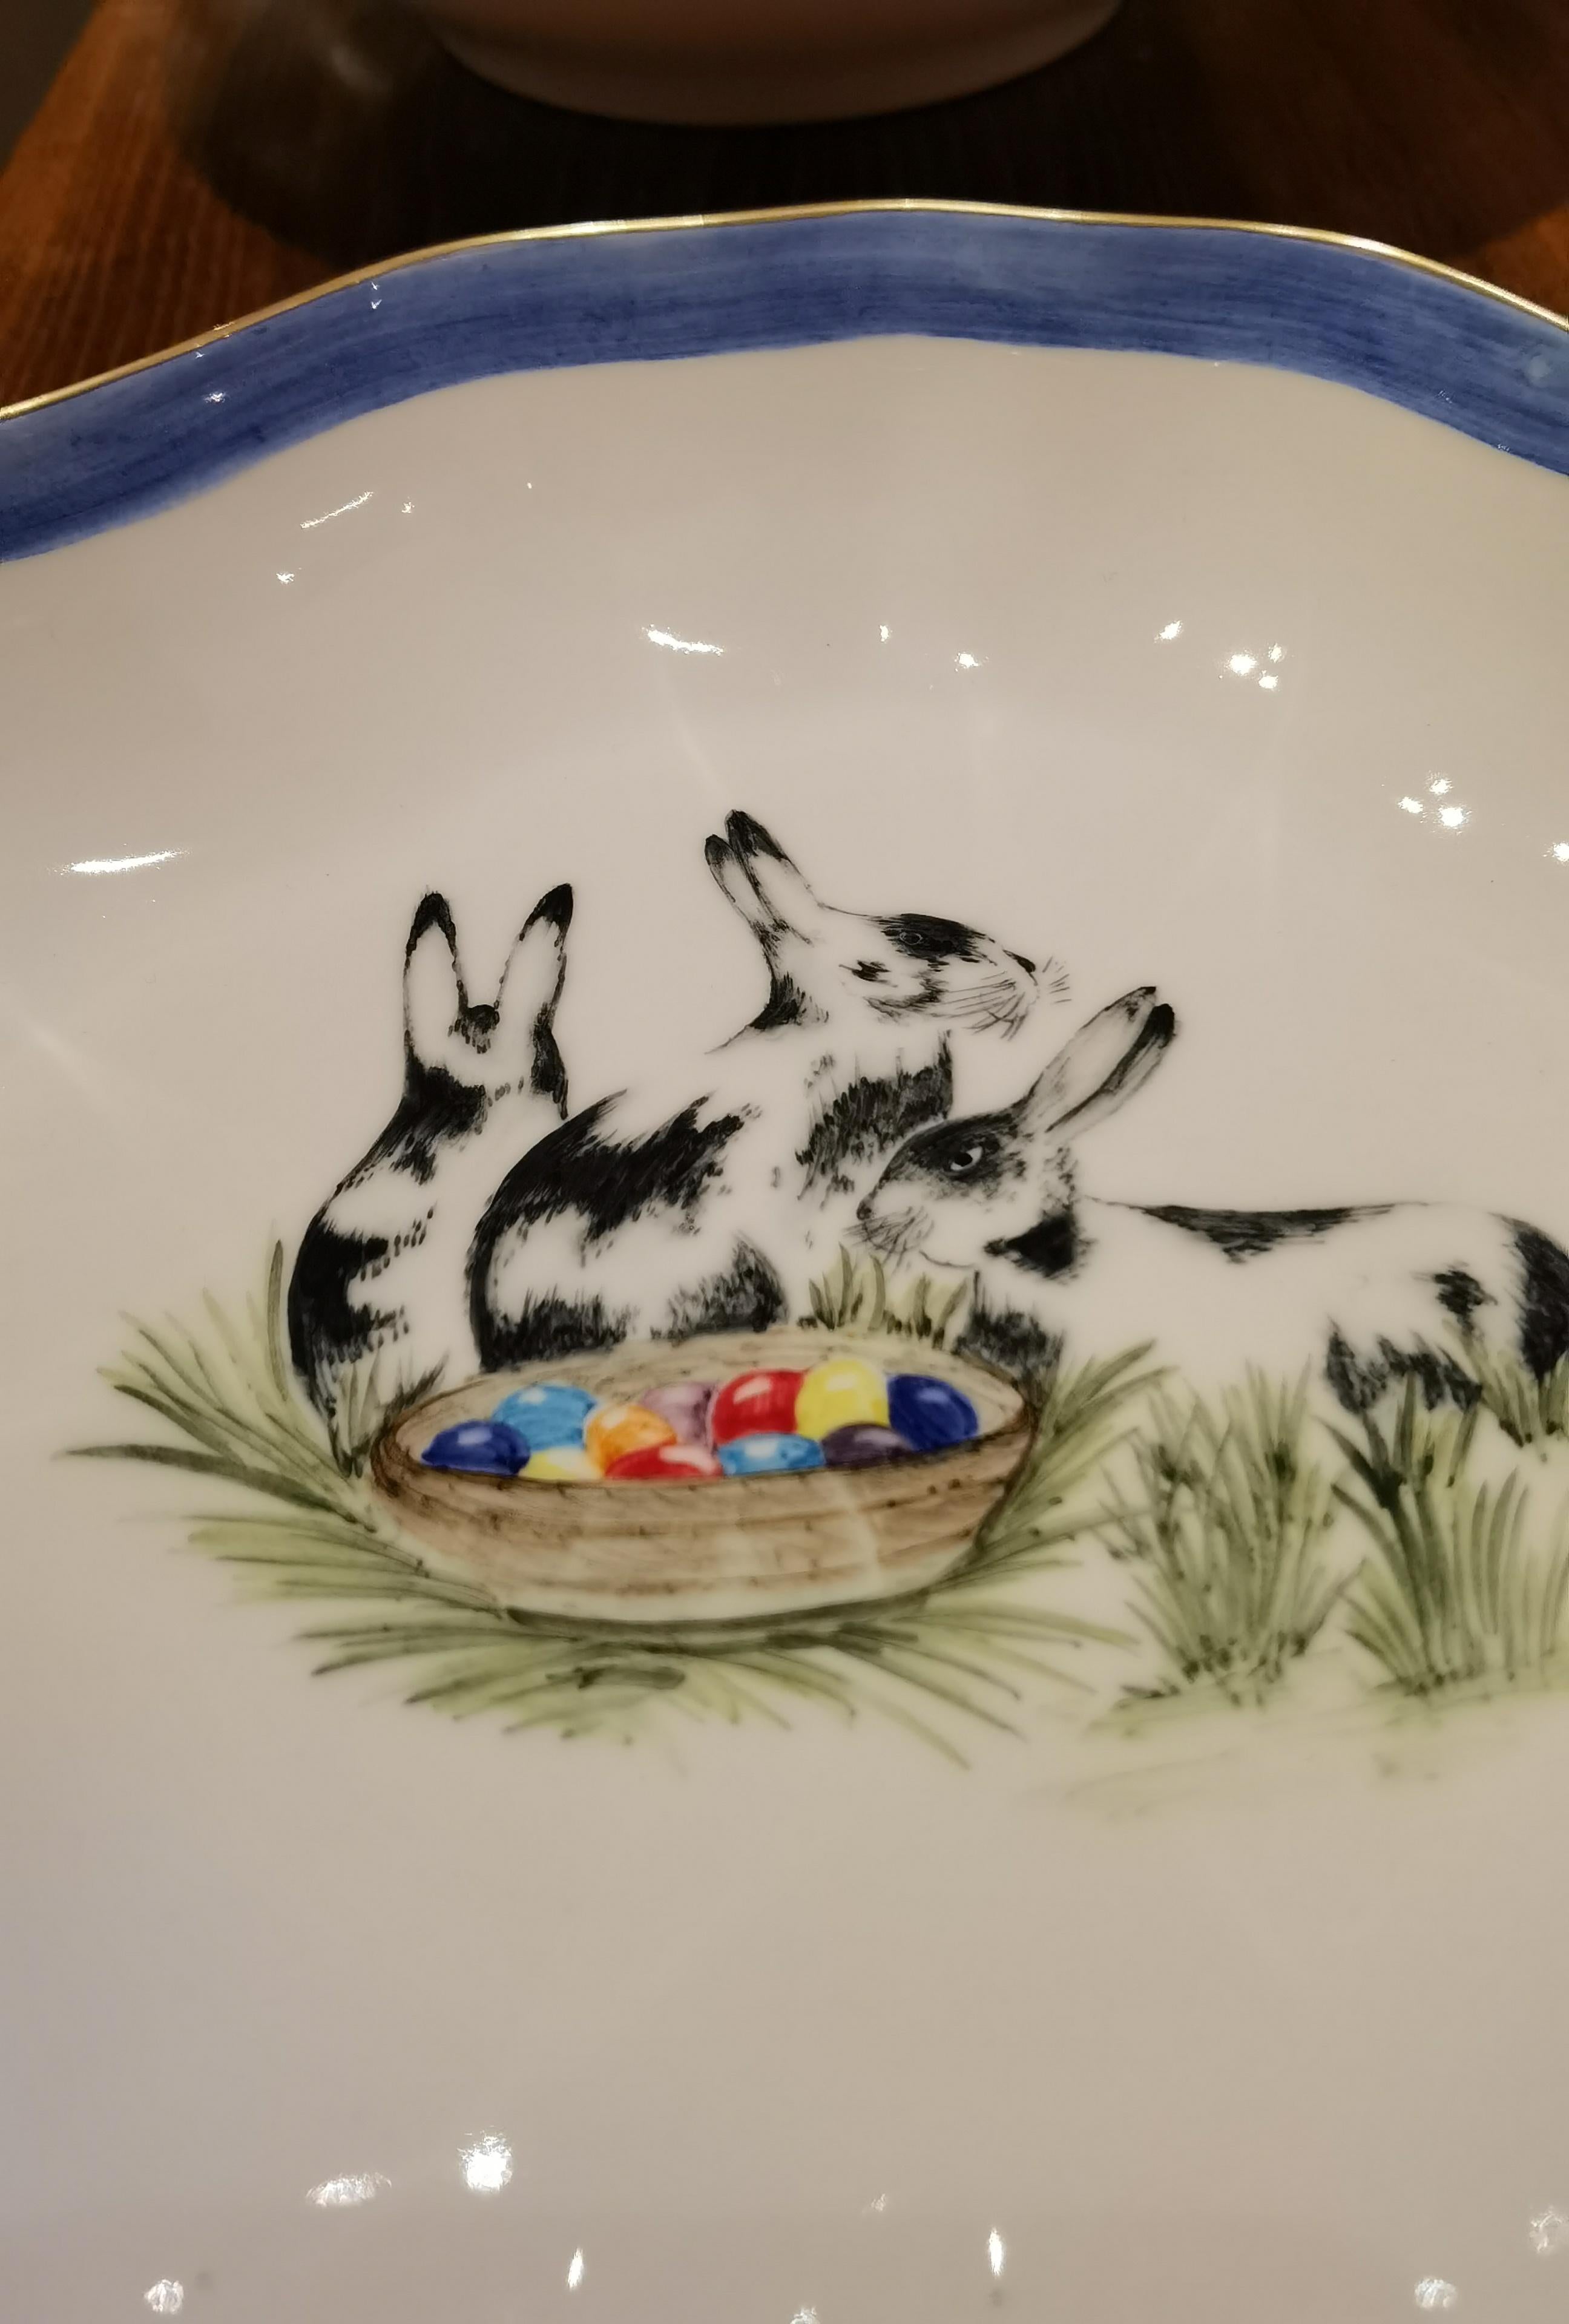 These completely handmade porcelain pastry dish is hands-free painted with a charming easter decor with rabbits and colored eggs. Rimmed by hand with a fine 24 carat gold line. Handmade in Bavaria / Germany.
About Sofina porcelain:
Based on the